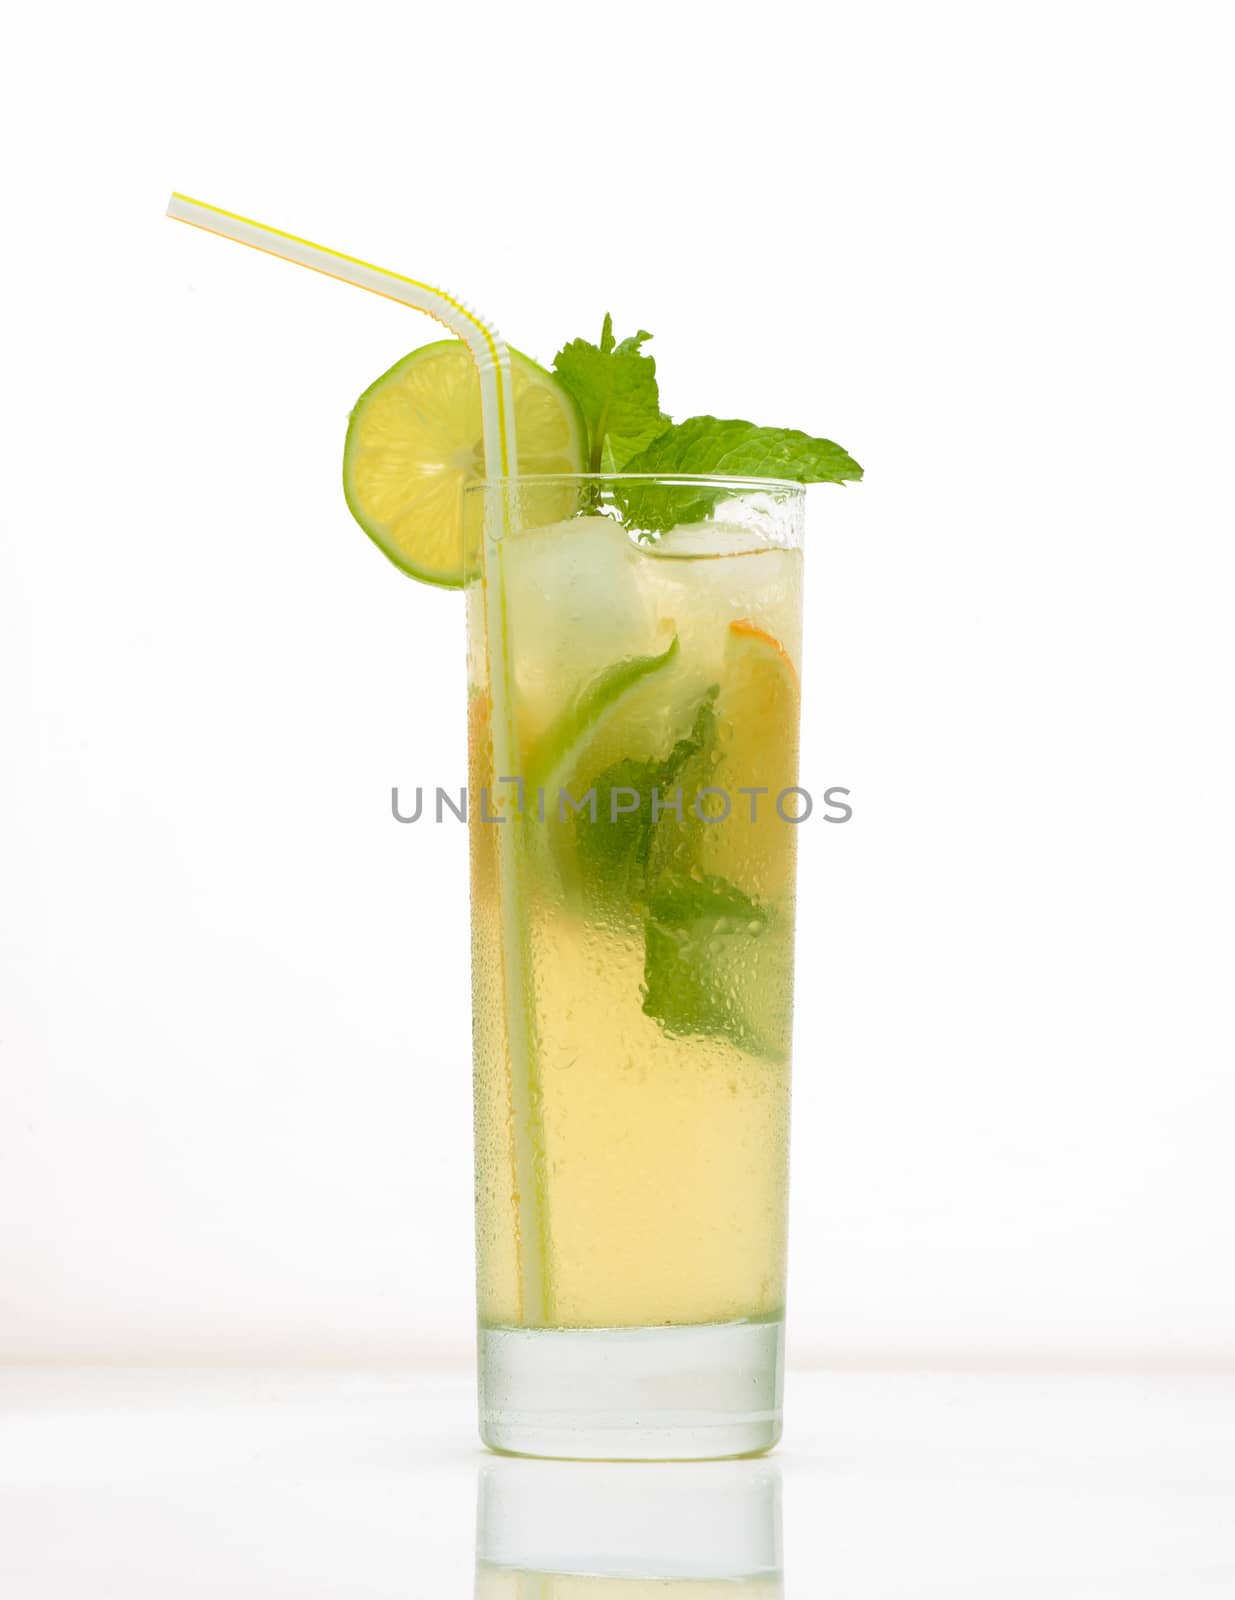 lemon drink in a glass with ice and straw. drink isolated on white background